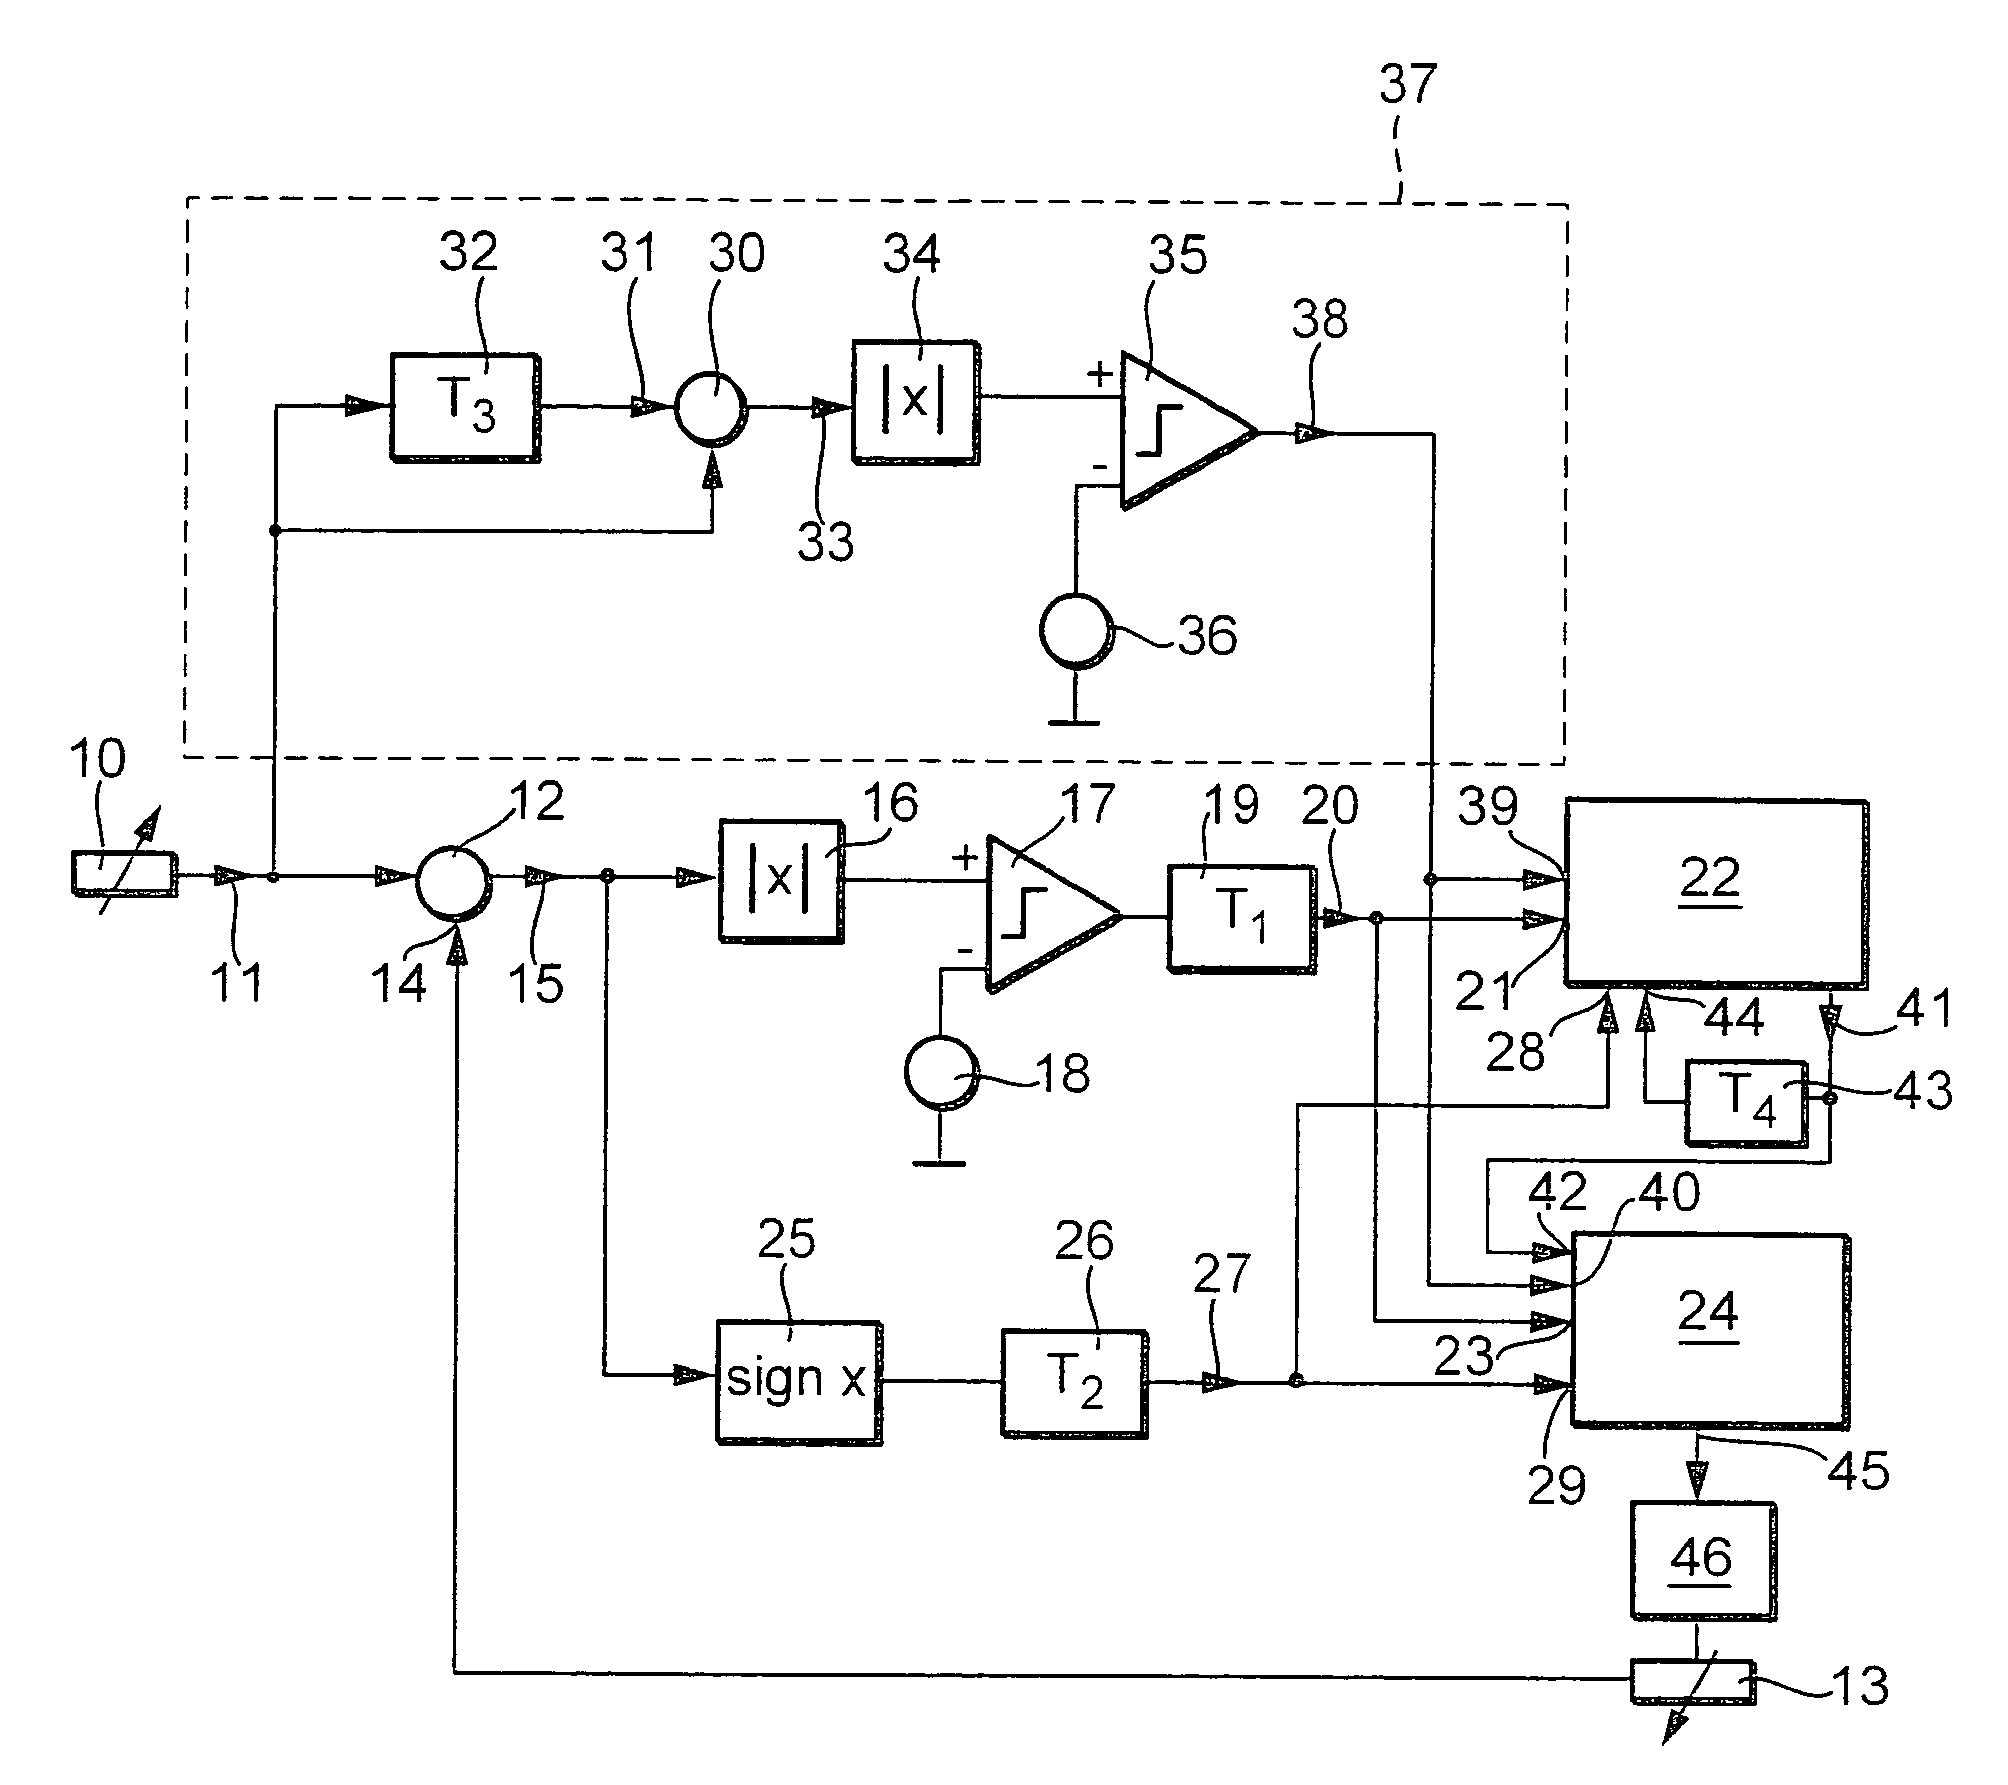 Circuit for operating an electric motor